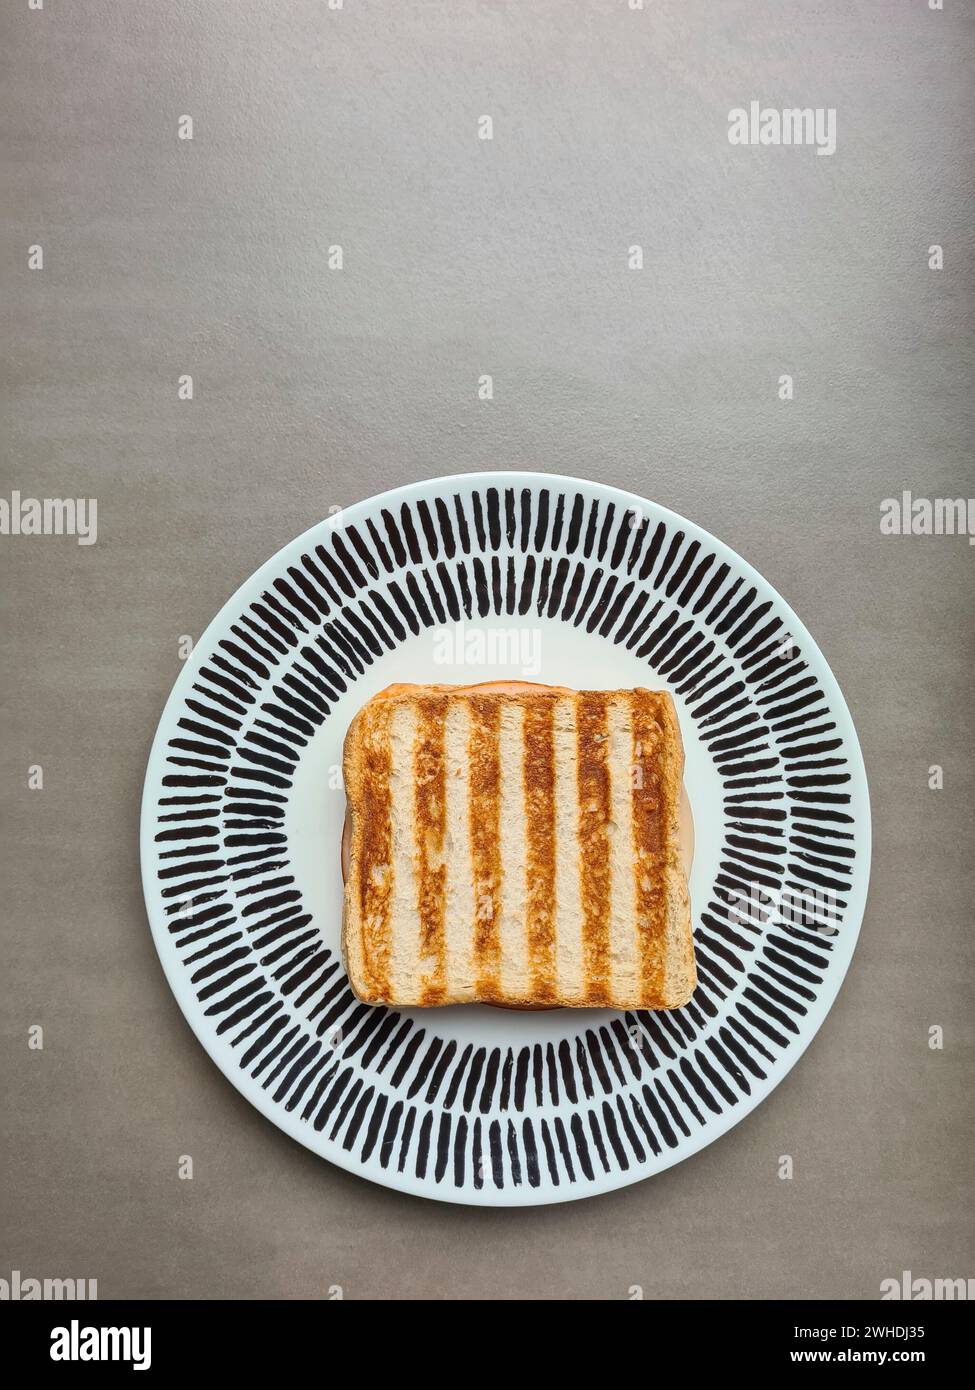 A grilled ham toast sandwich with a striped pattern lies on a plate against a gray background Stock Photo